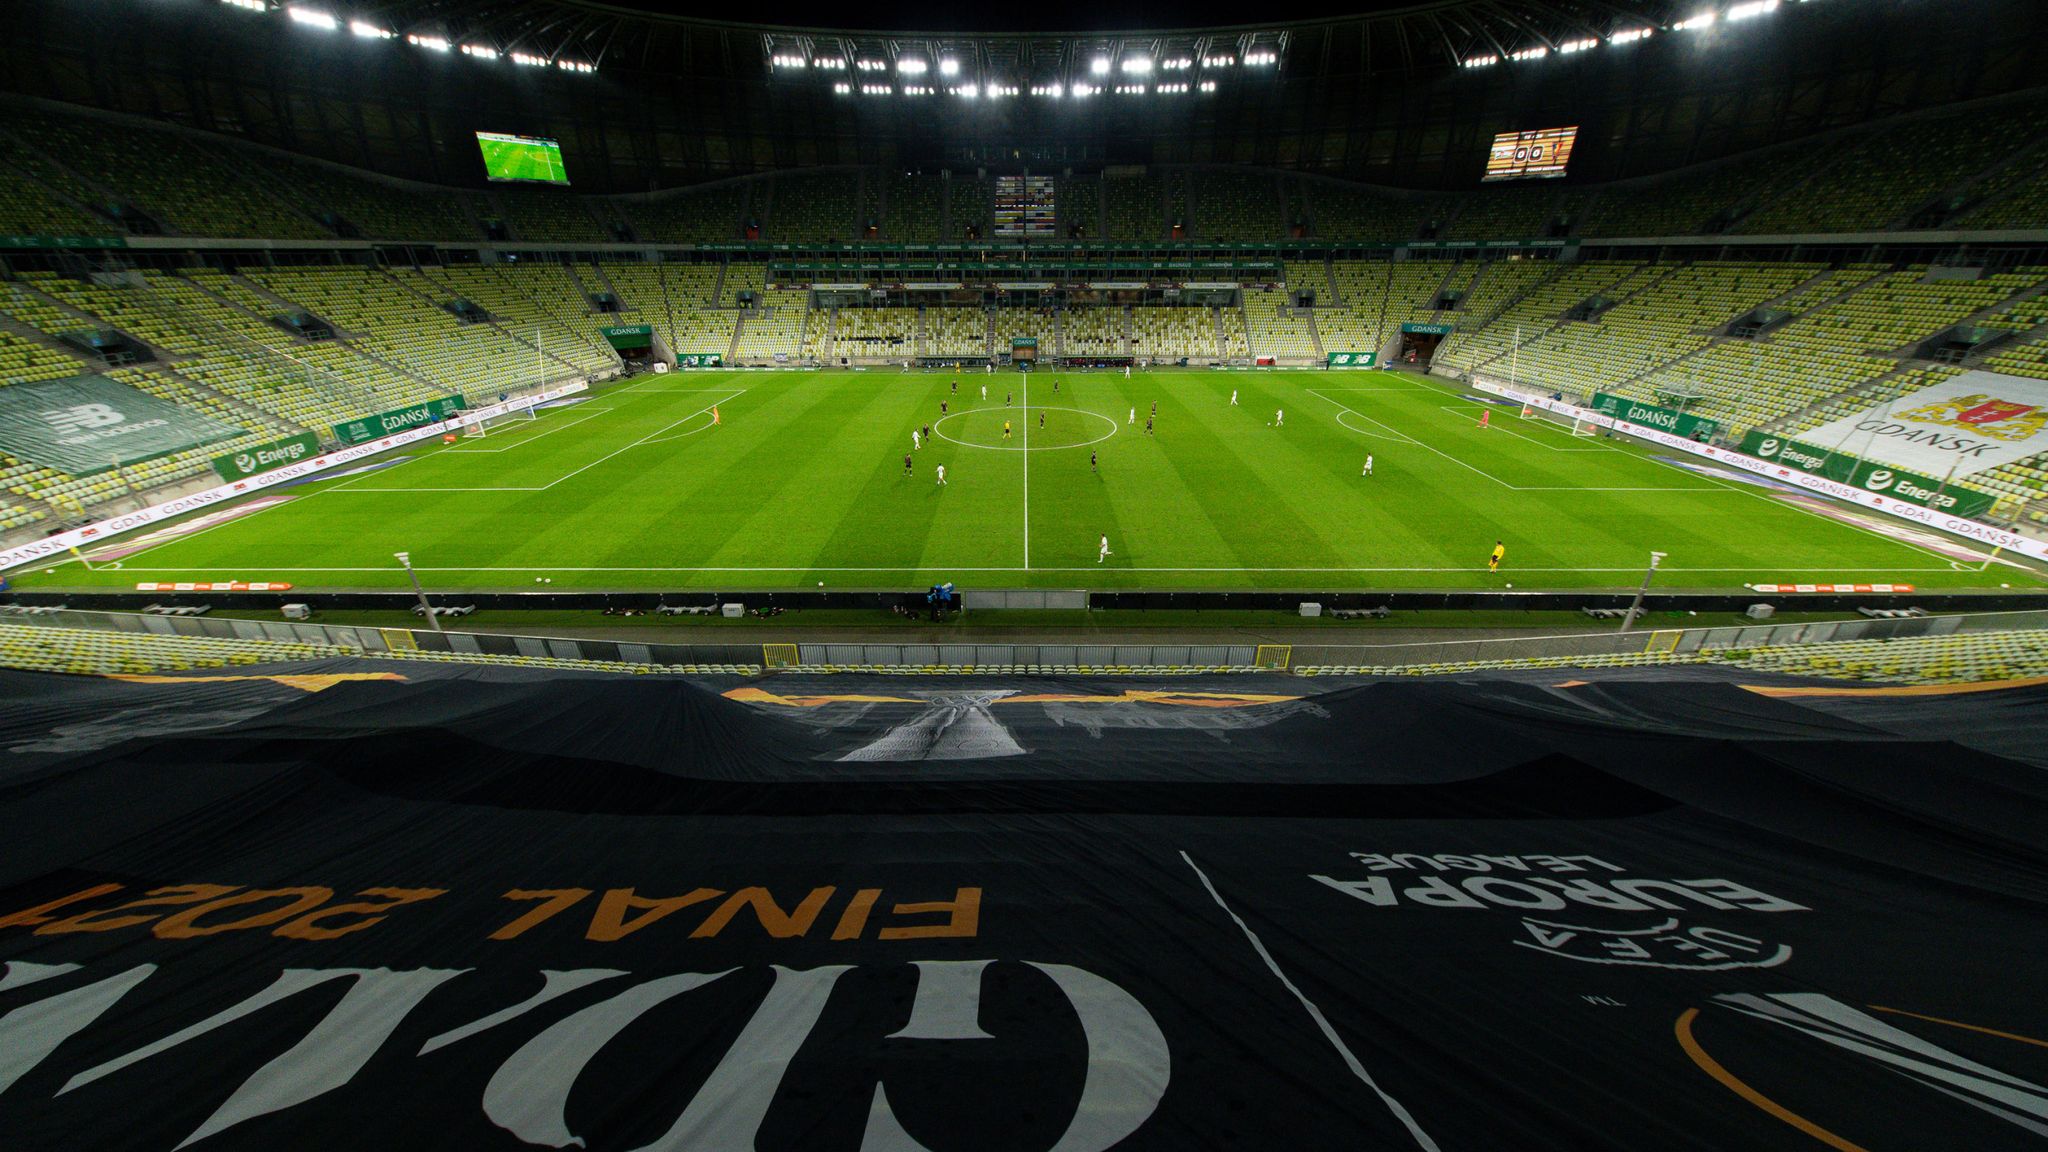 Europa League: UEFA confirms up to 9,500 fans can watch final in Gdansk